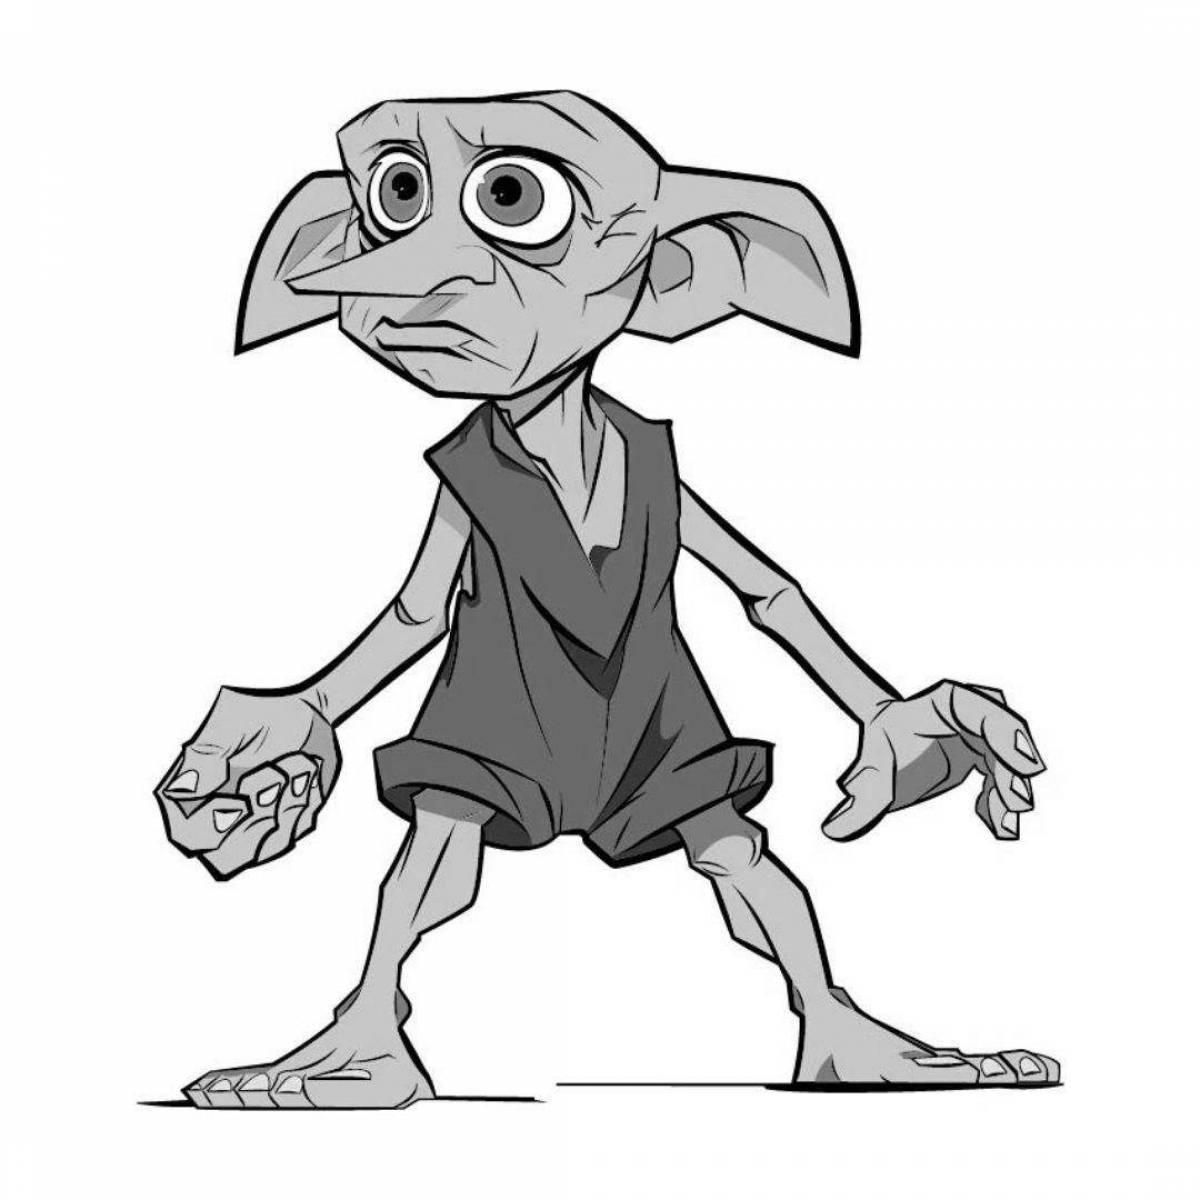 Harry potter dobby coloring book